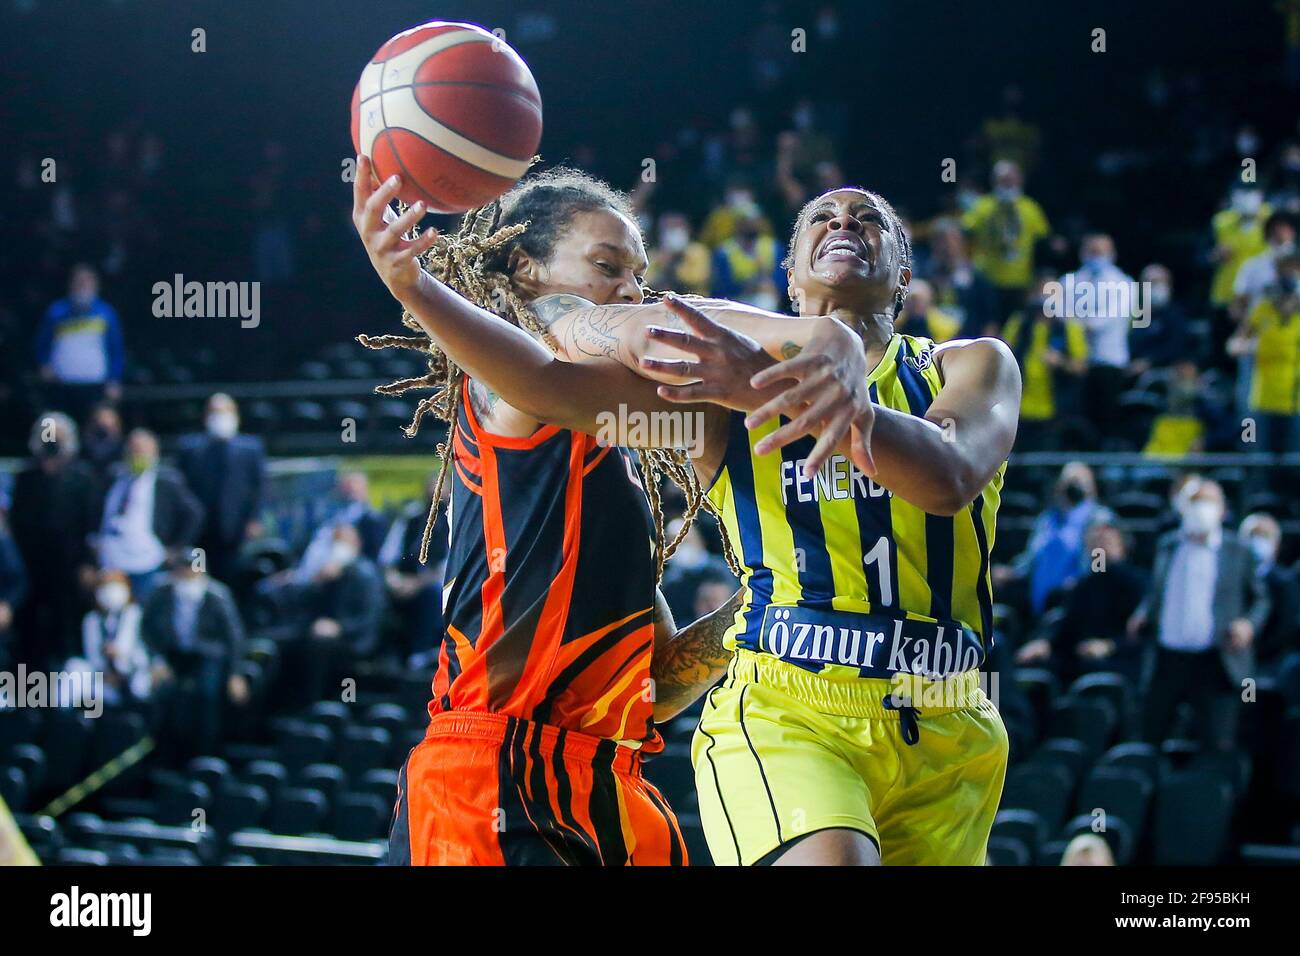 ISTANBUL, Turkey. 16th Apr, 2021: Istanbul, Turkey. 16th Apr, 2021. ISTANBUL, TURKEY - APRIL 16: Kia Vaughn of Fenerbahce Oznur Kablo during the Euroleague Women Final Four match between Fenerbahce Oznur Kablo and UMMC Ekaterinburg at Volkswagen Arena on April 16, 2021 in Istanbul, Turkey (Photo by /Orange Pictures) Credit: Orange Pics BV/Alamy Live News Stock Photo